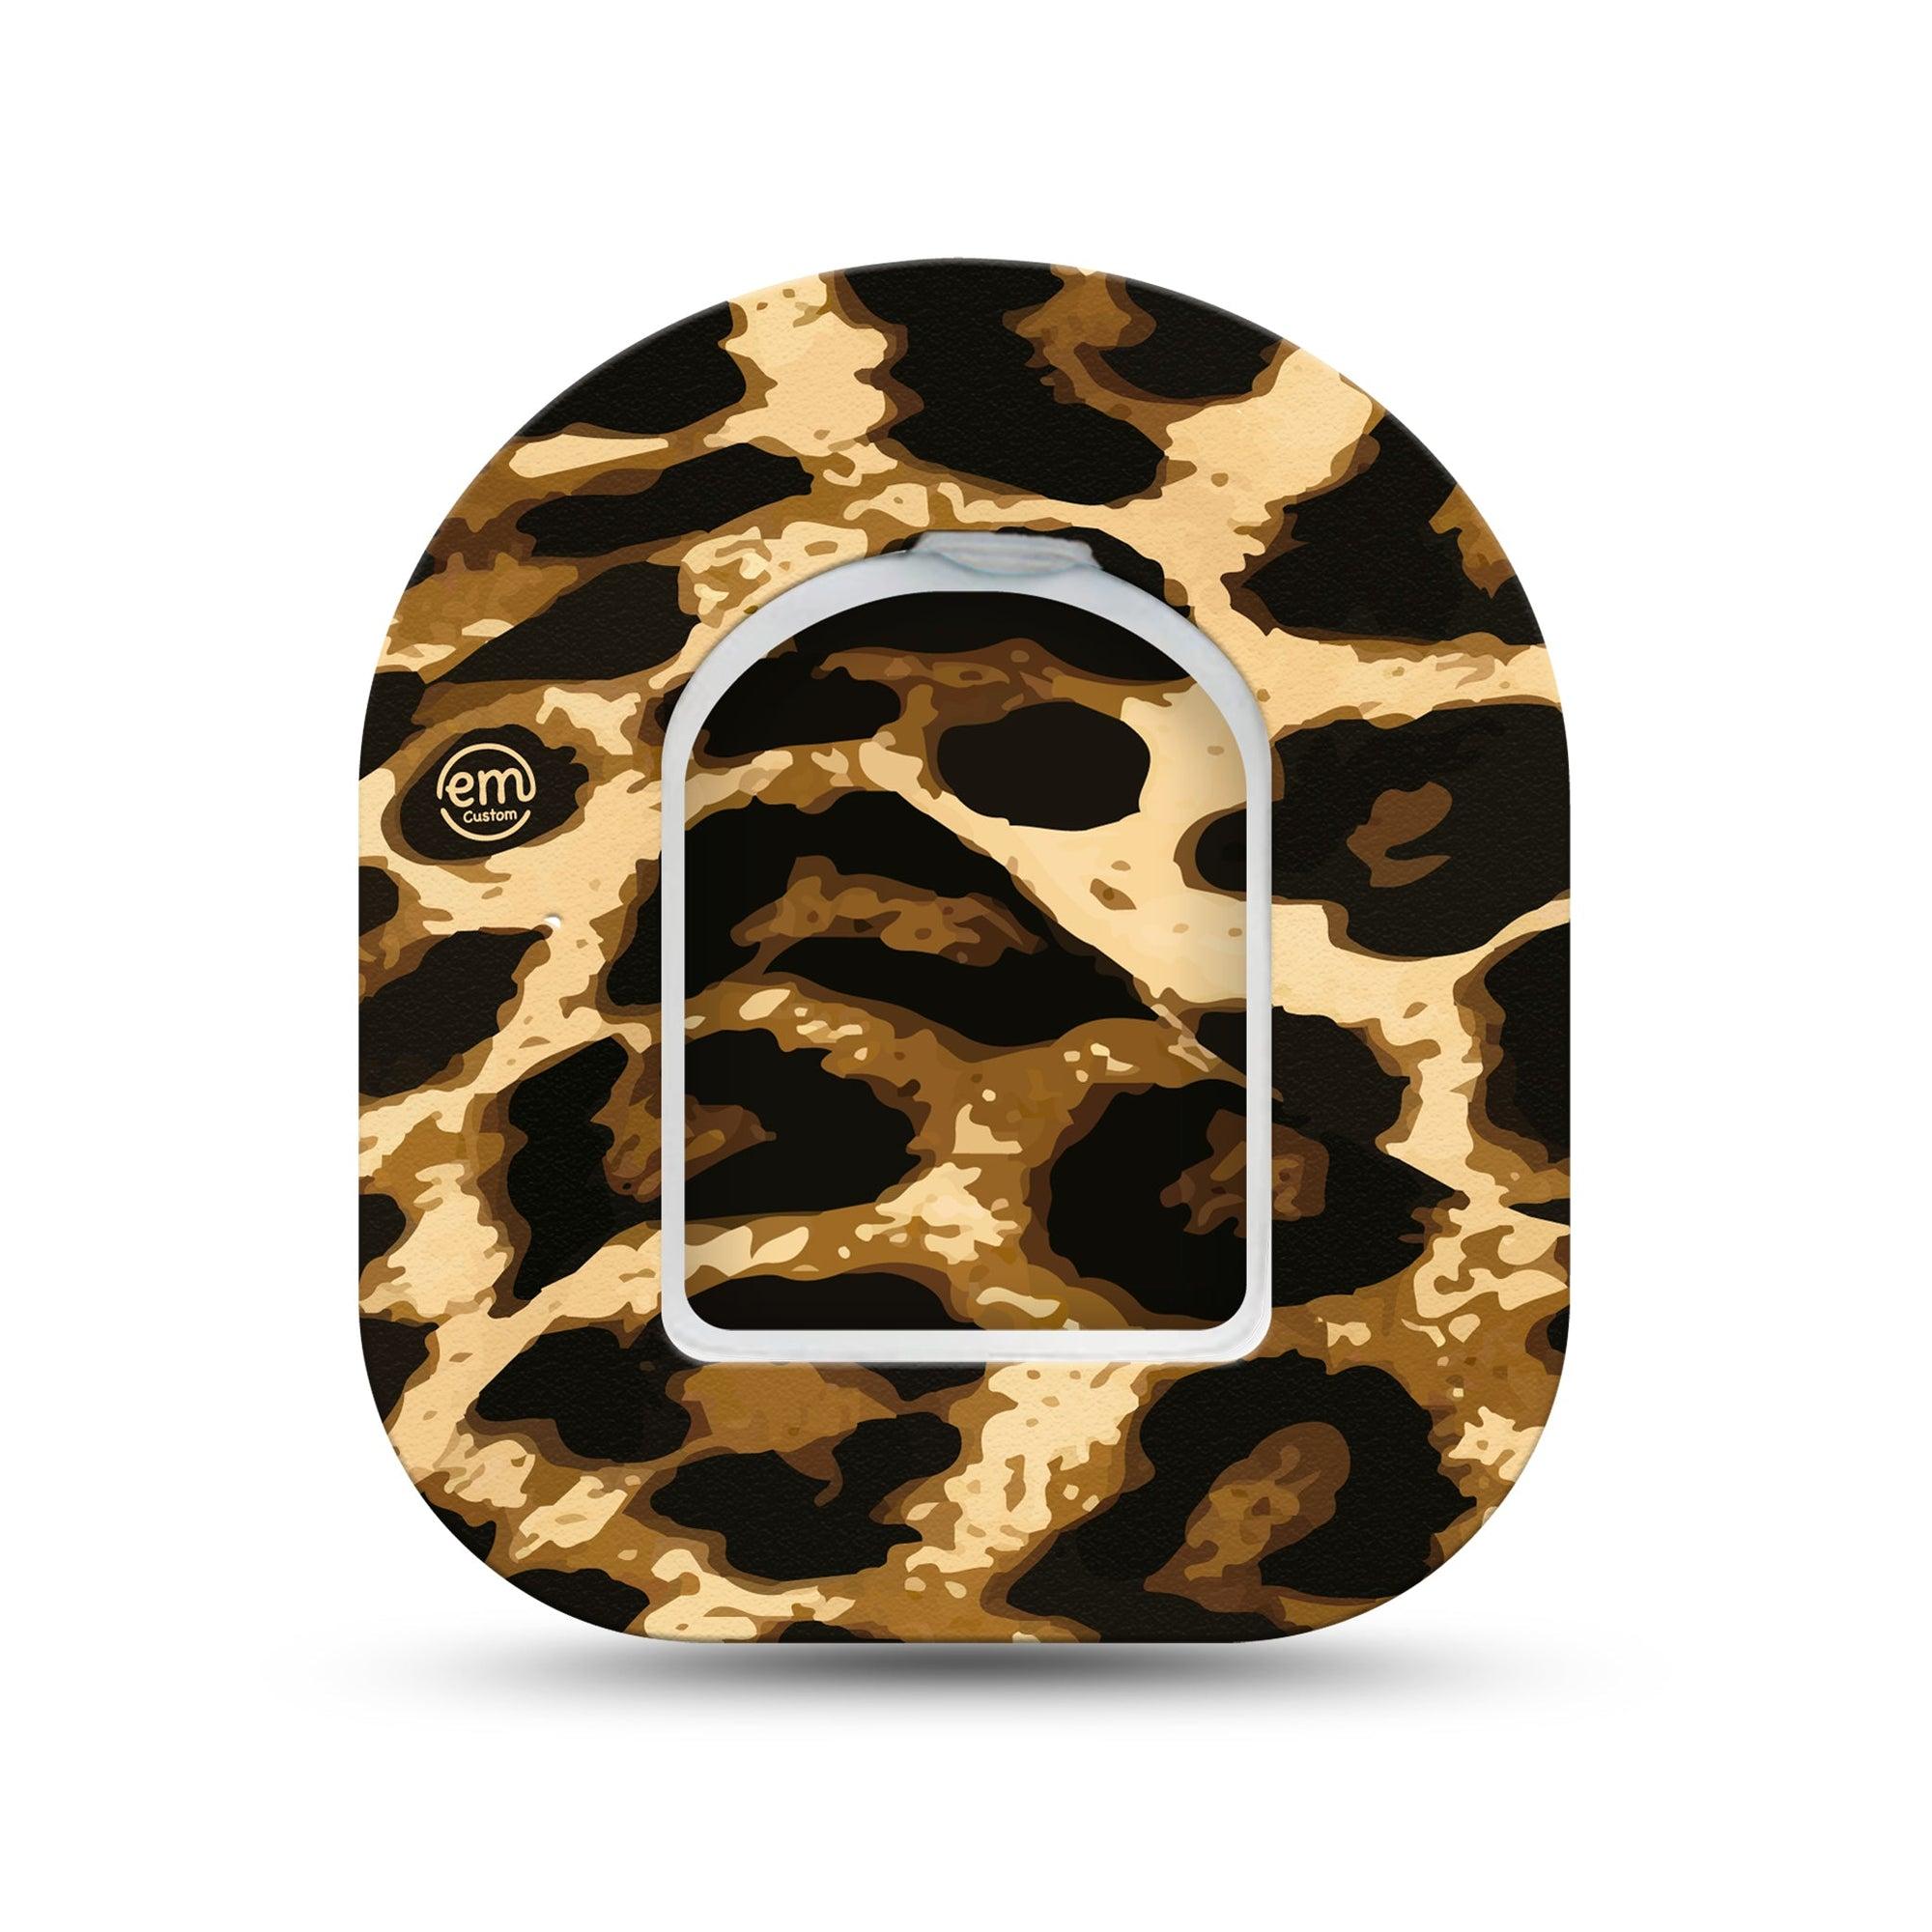 ExpressionMed Leopard Omnipod Surface Center Sticker and Mini Tape Animal Spots Themed Vinyl Sticker and Tape Design Pump Design